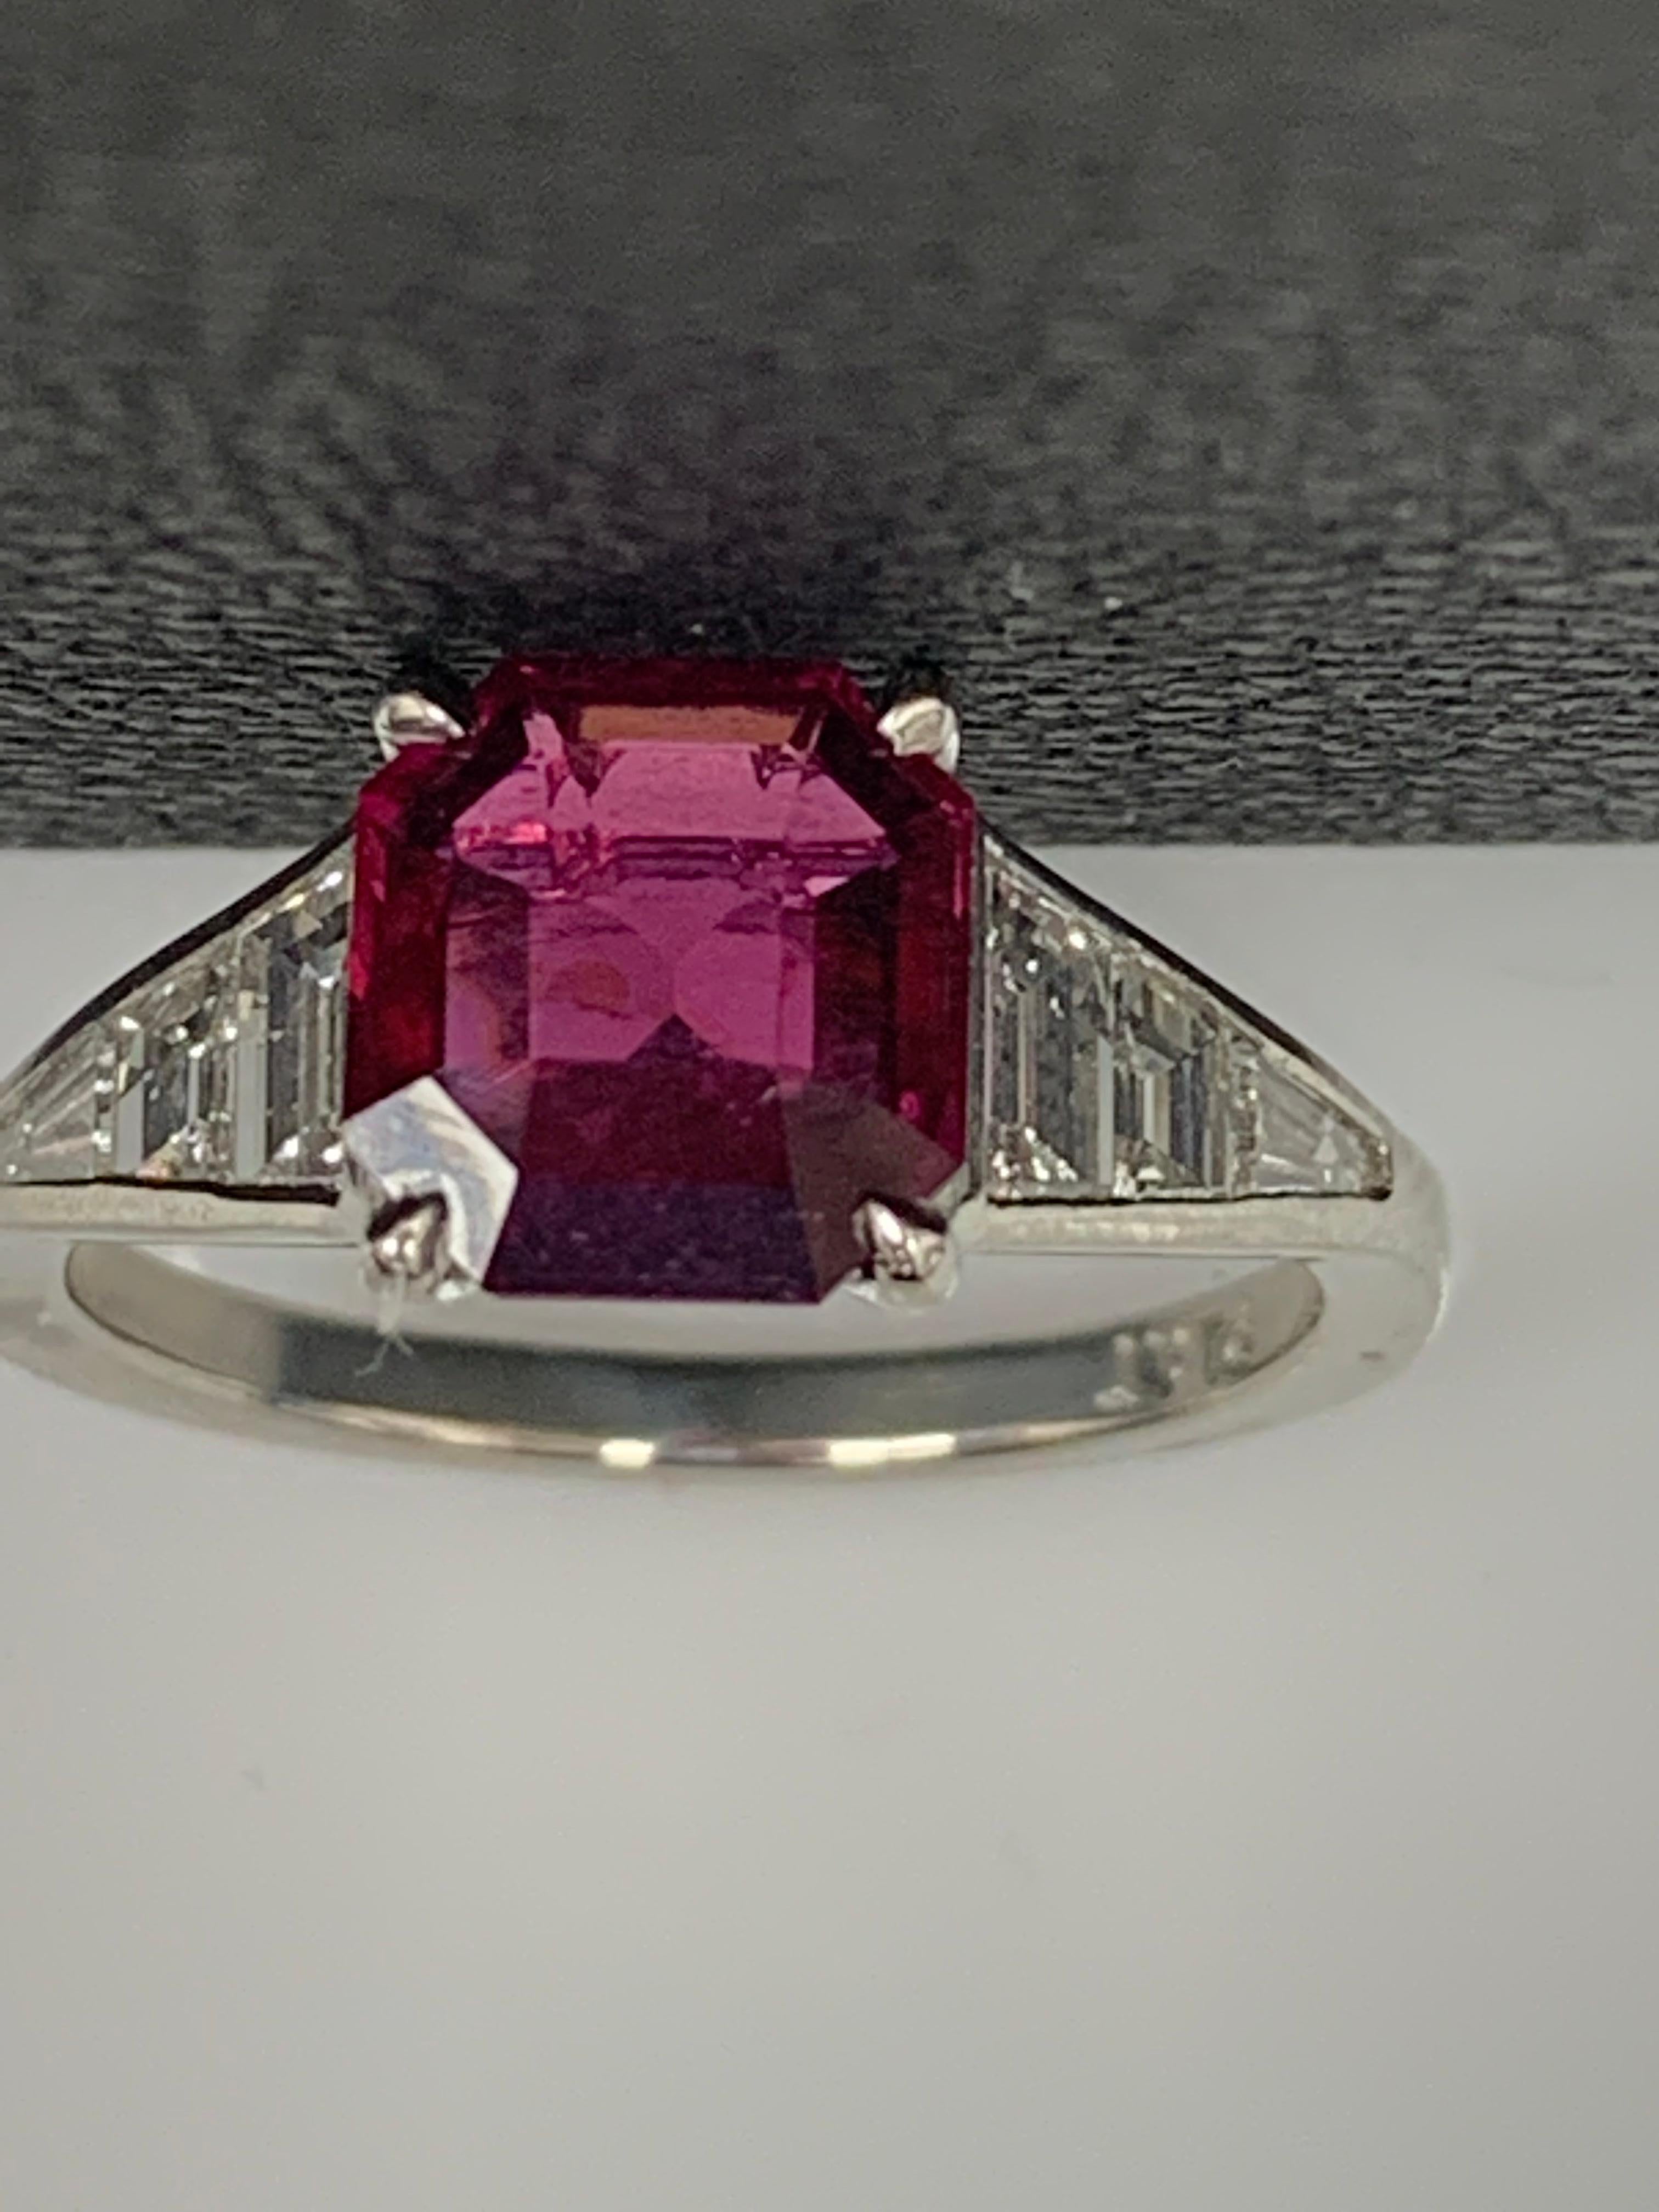 A stunning well-crafted engagement ring showcasing a 2.11-carat Emerald Cut Ruby. Flanking the center diamond are perfectly matched graduating step-cut diamonds, channel set in a polished platinum mounting. 6 Accent diamonds weigh 0.58 carats in